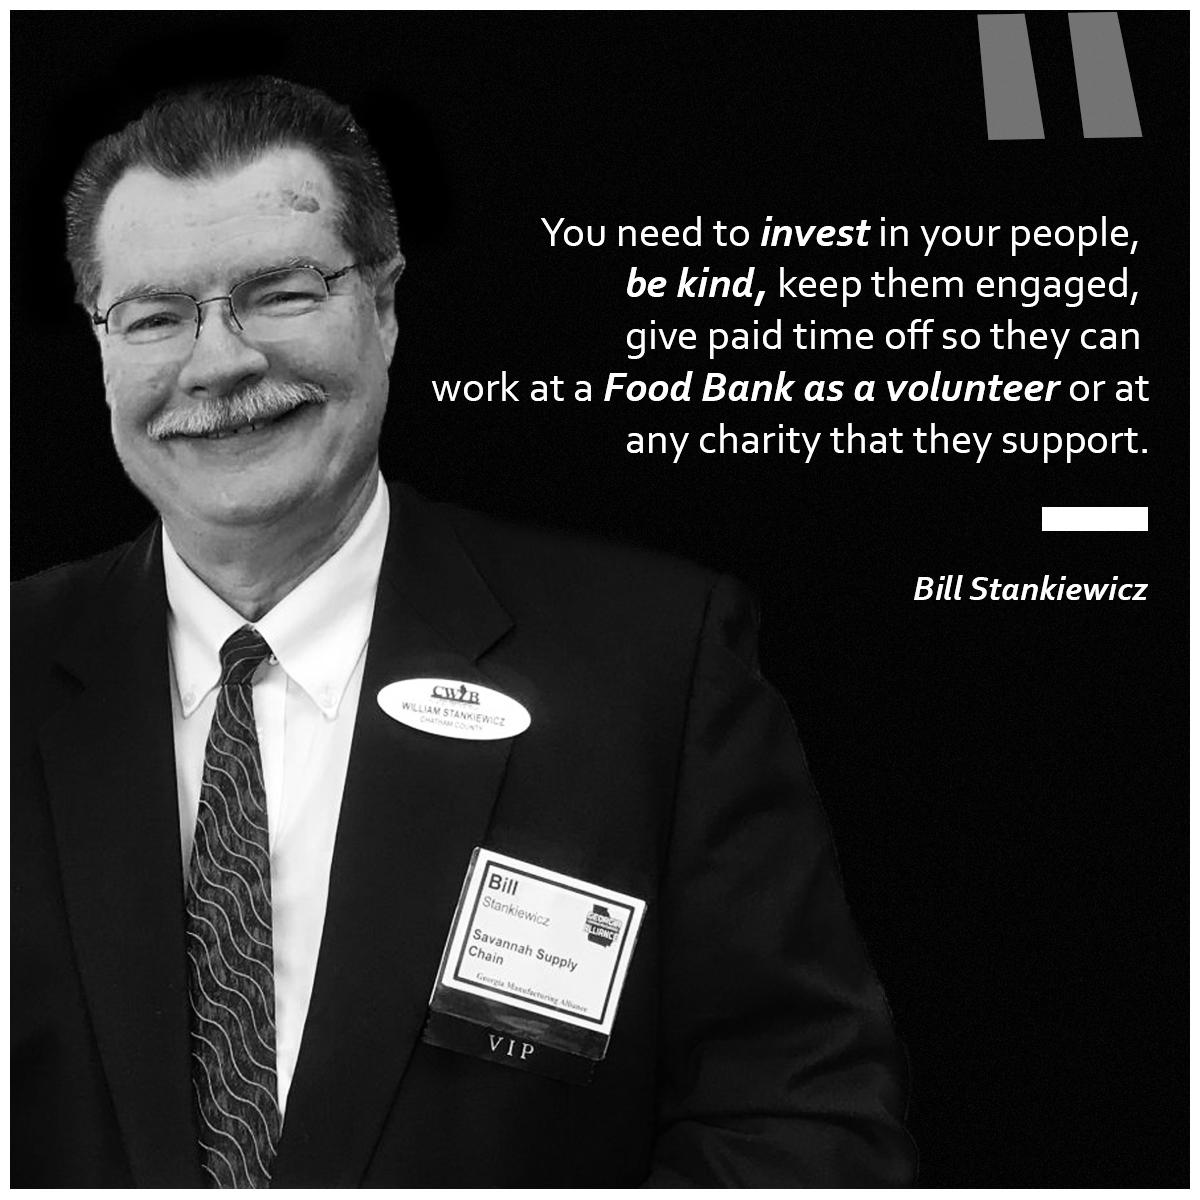 You need to invest in your people,
be kind, keep them engaged,
give paid time off so they can

work at a Food Bank as a volunteer or at
any charity that they support.

Bill Stankiewicz